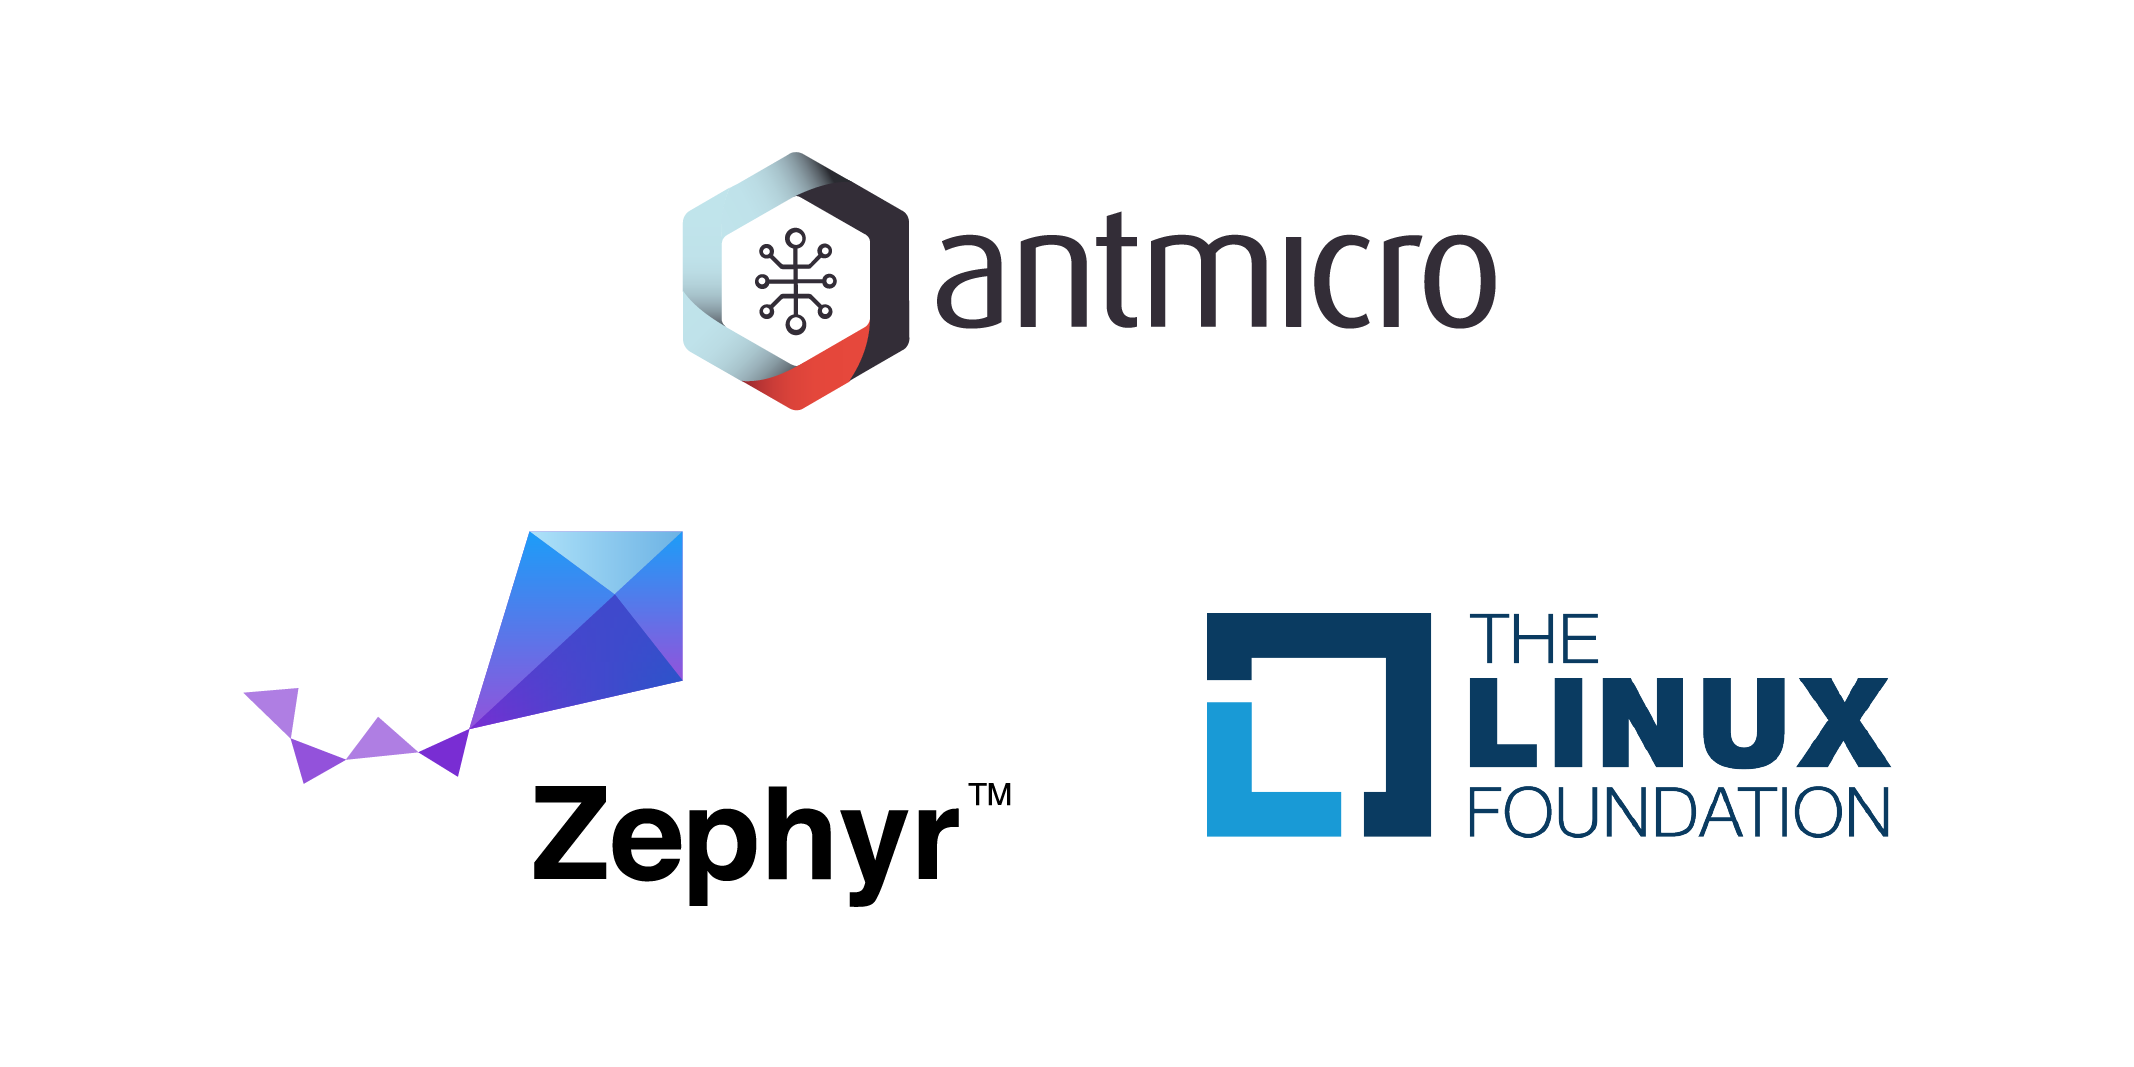 Antmicro joins LF and Zephyr Project